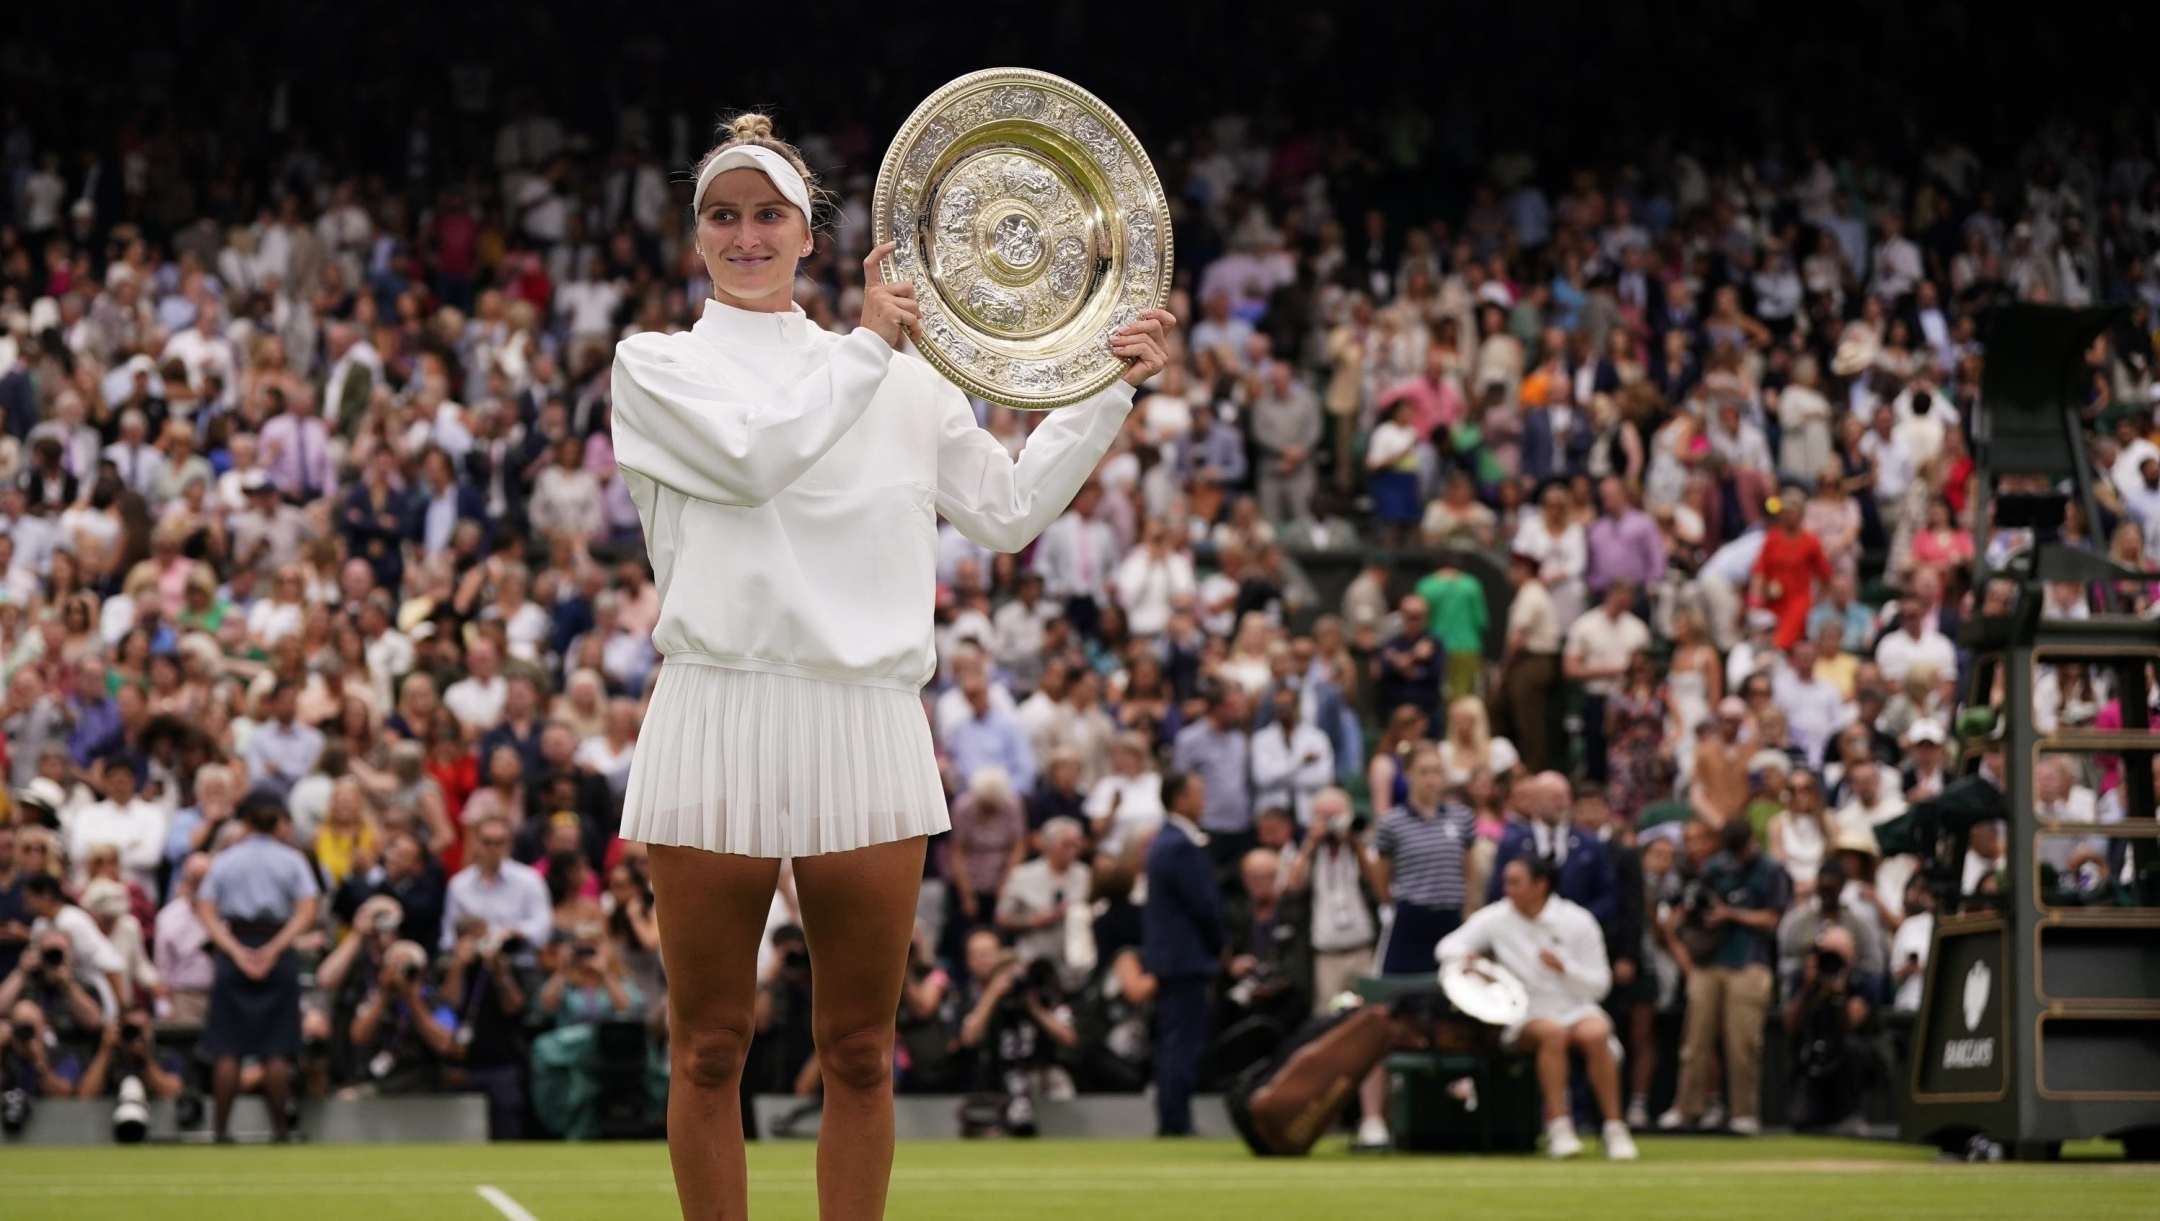 Czech Republic's Marketa Vondrousova celebrates with the trophy after beating Tunisia's Ons Jabeur to win the final of the women's singles on day thirteen of the Wimbledon tennis championships in London, Saturday, July 15, 2023. (AP Photo/Alberto Pezzali)